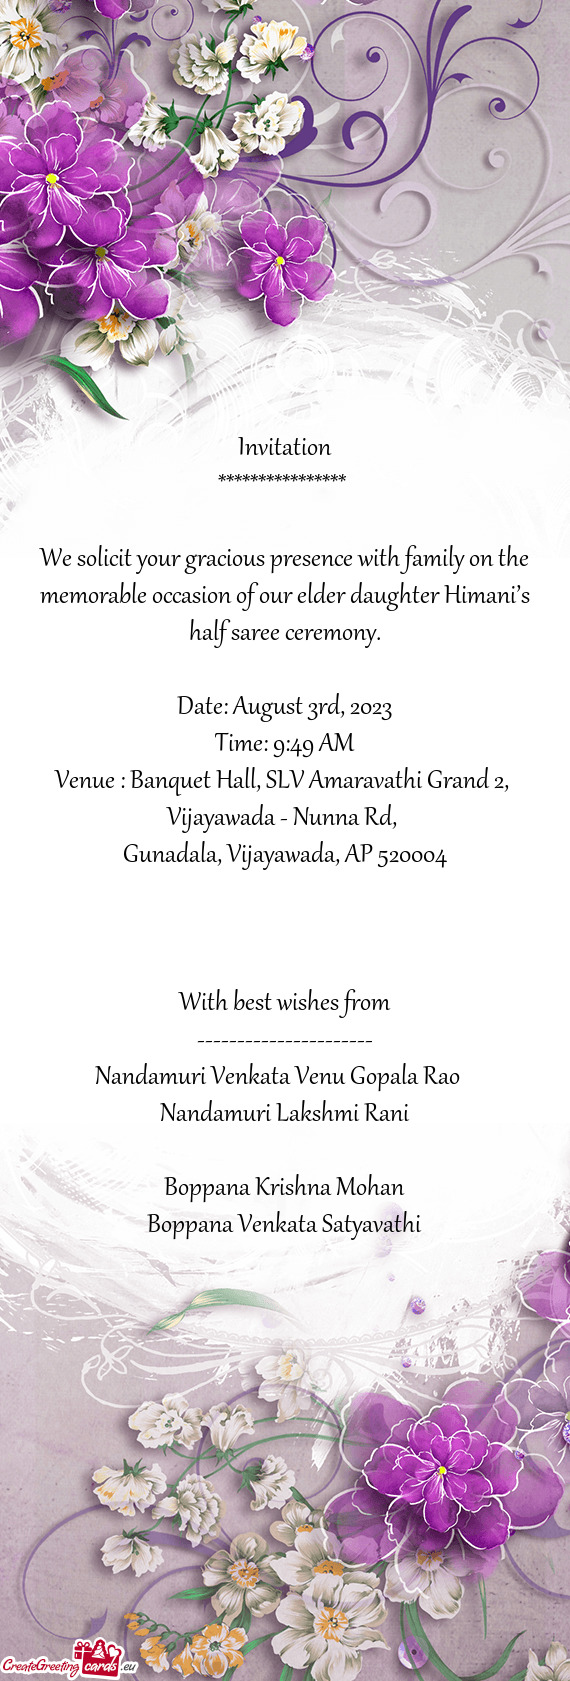 We solicit your gracious presence with family on the memorable occasion of our elder daughter Himani